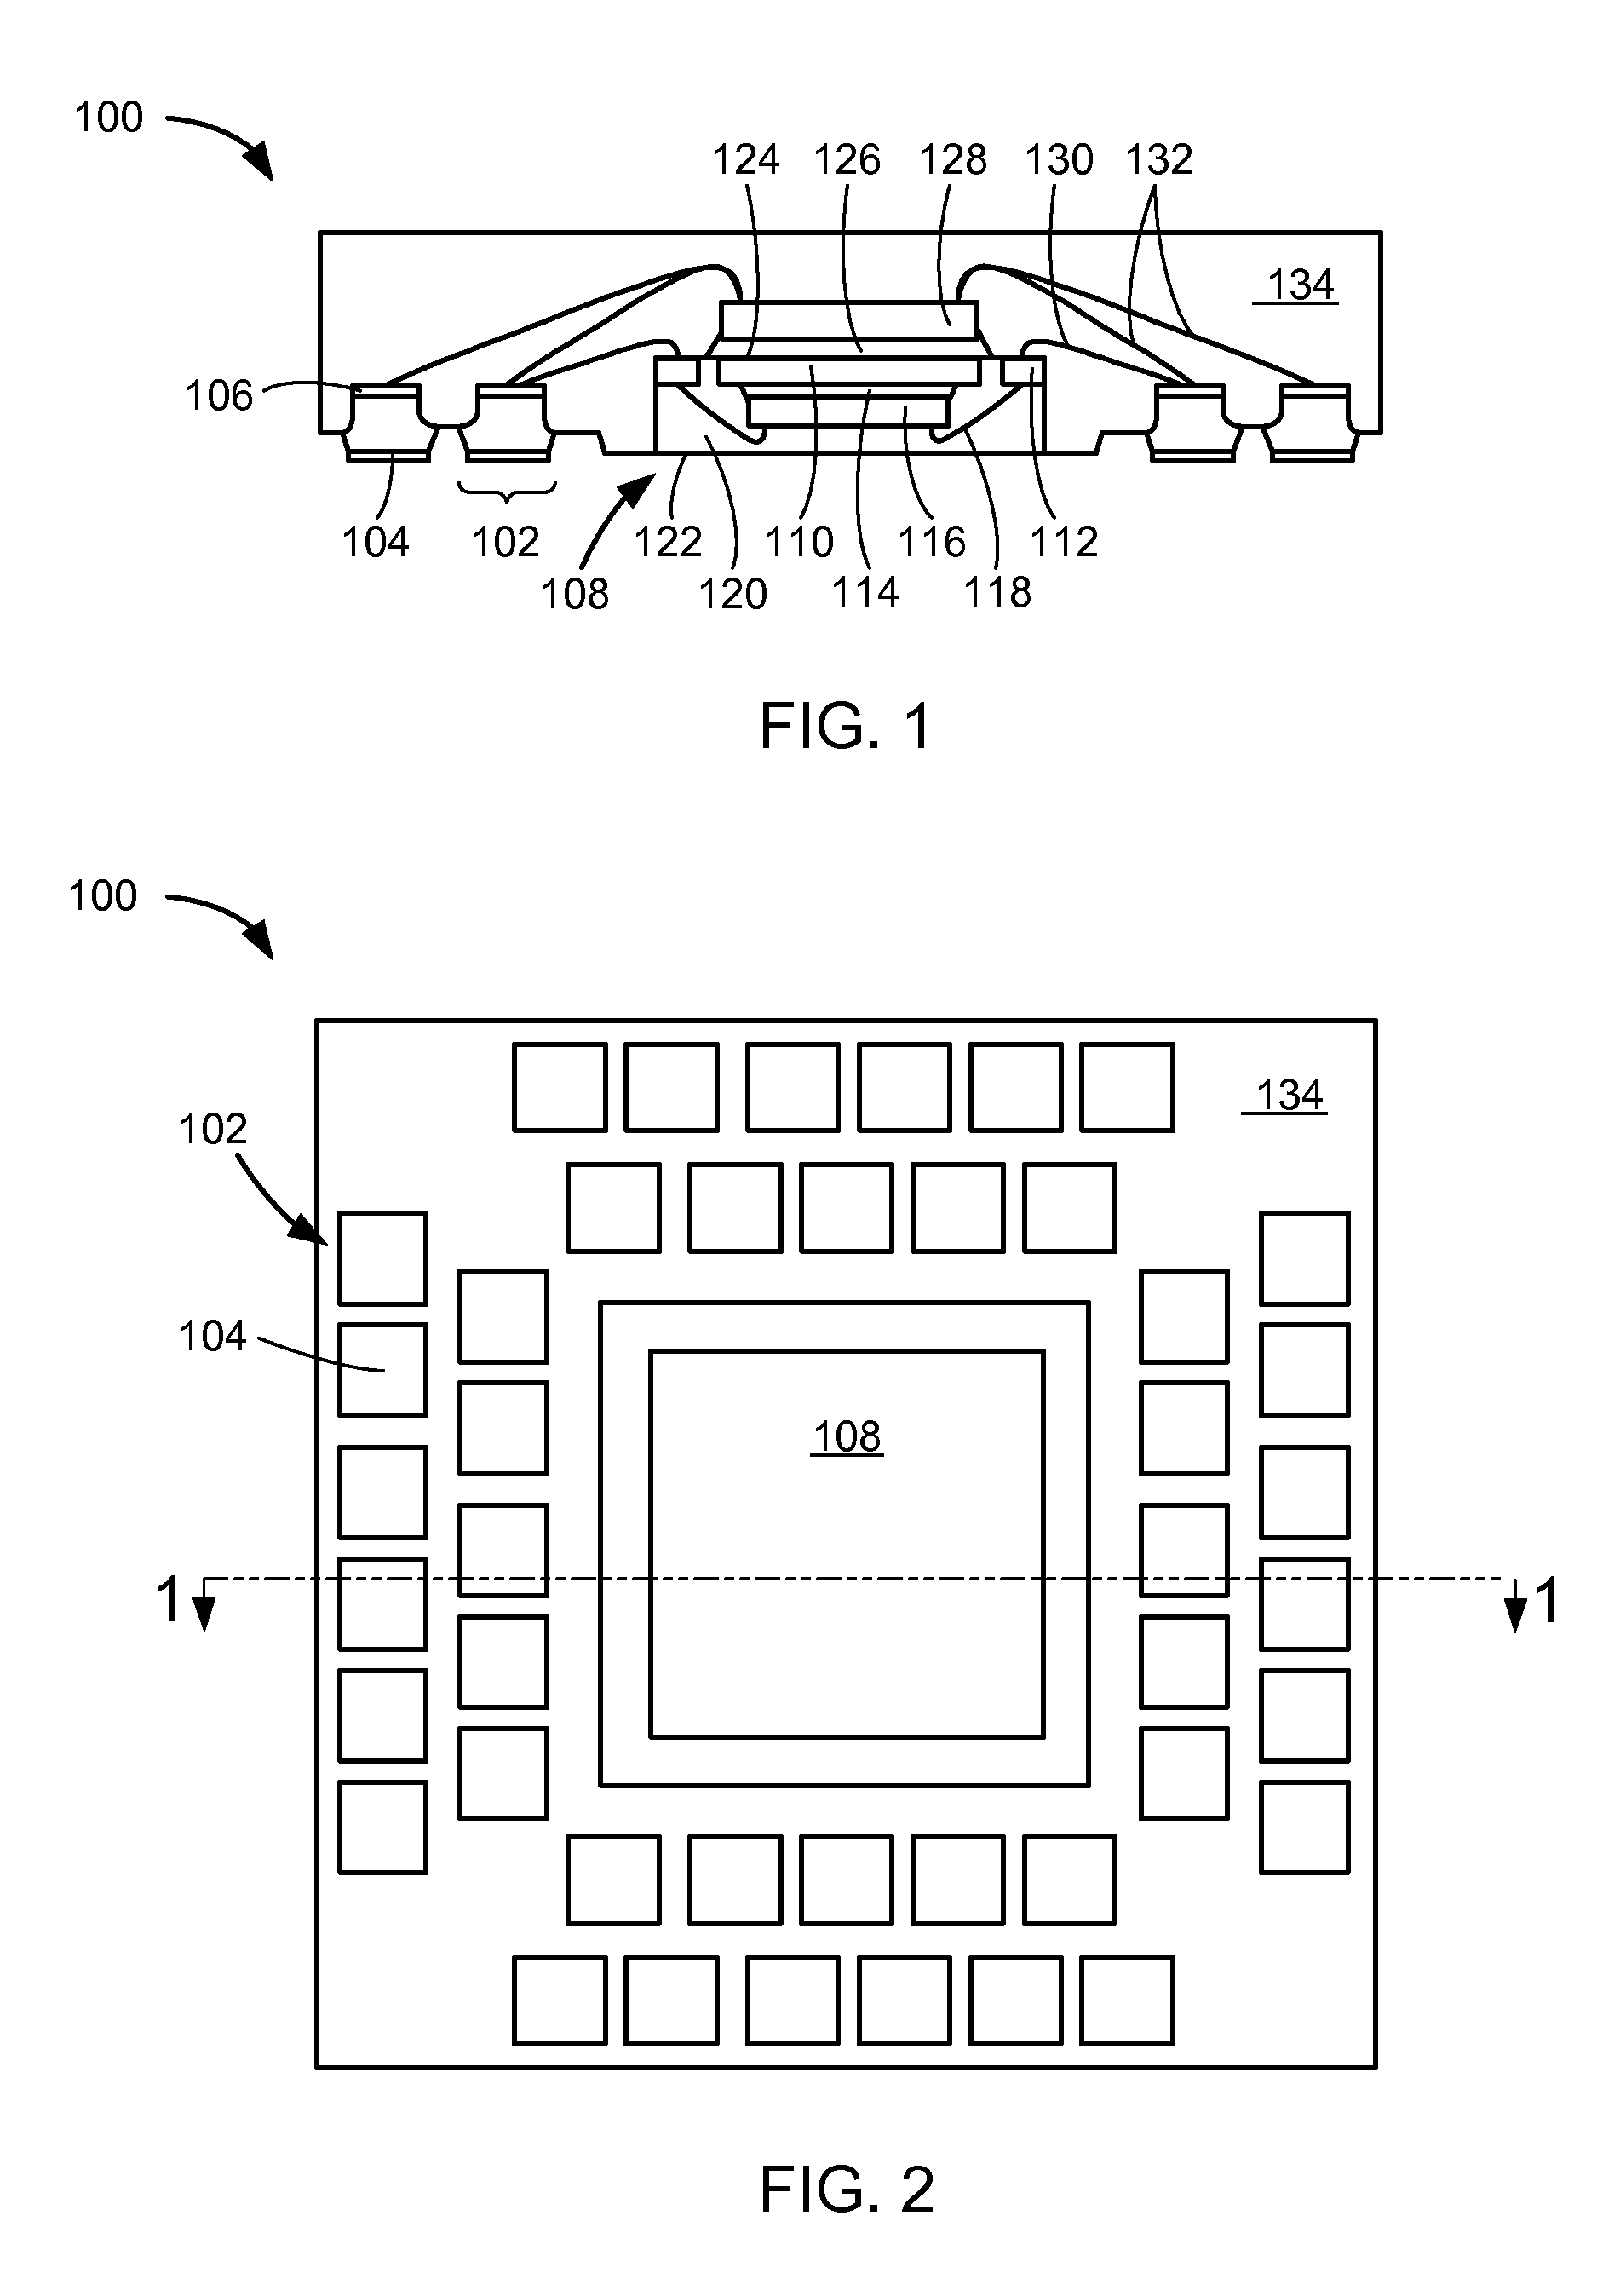 Integrated circuit packaging system with quad flat no-lead package and method of manufacture thereof